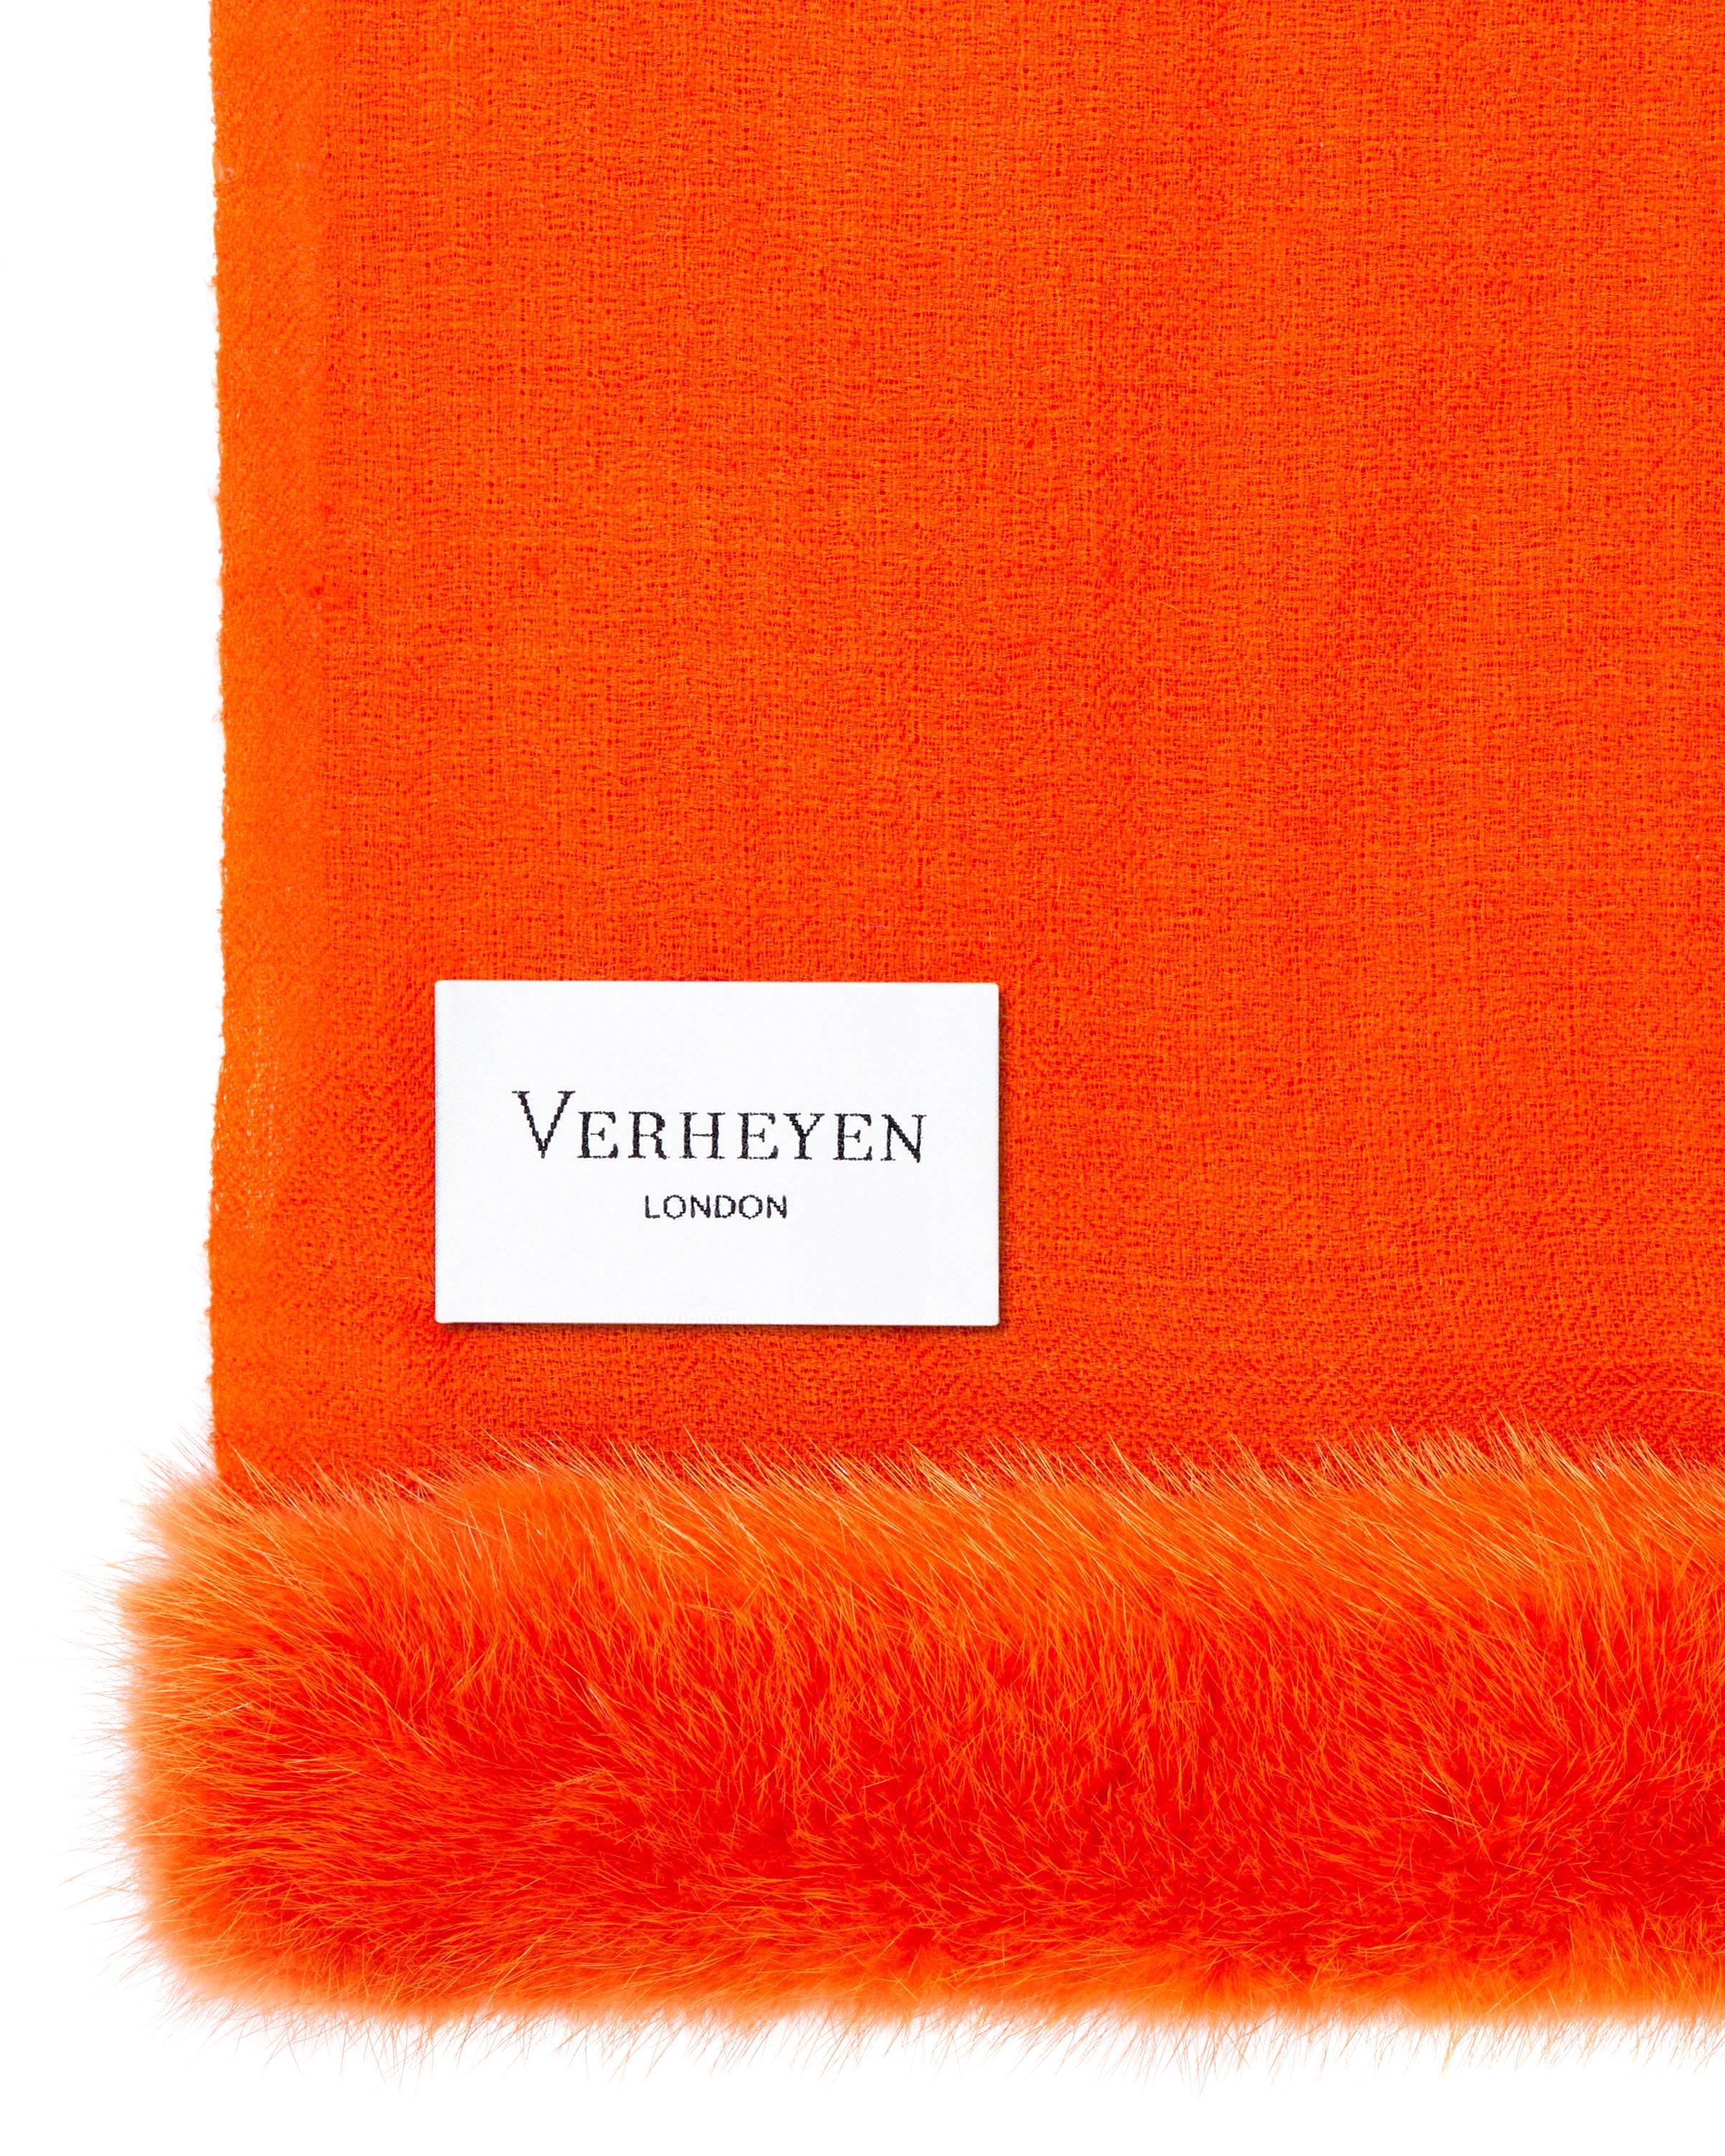 Verheyen London’s shawl is spun from the finest lightweight handwoven cashmere from Kashmir and finished with the most exquisite dyed mink. Its warmth envelopes you with luxury, perfect for travel and comfort wherever you are.

PRODUCT